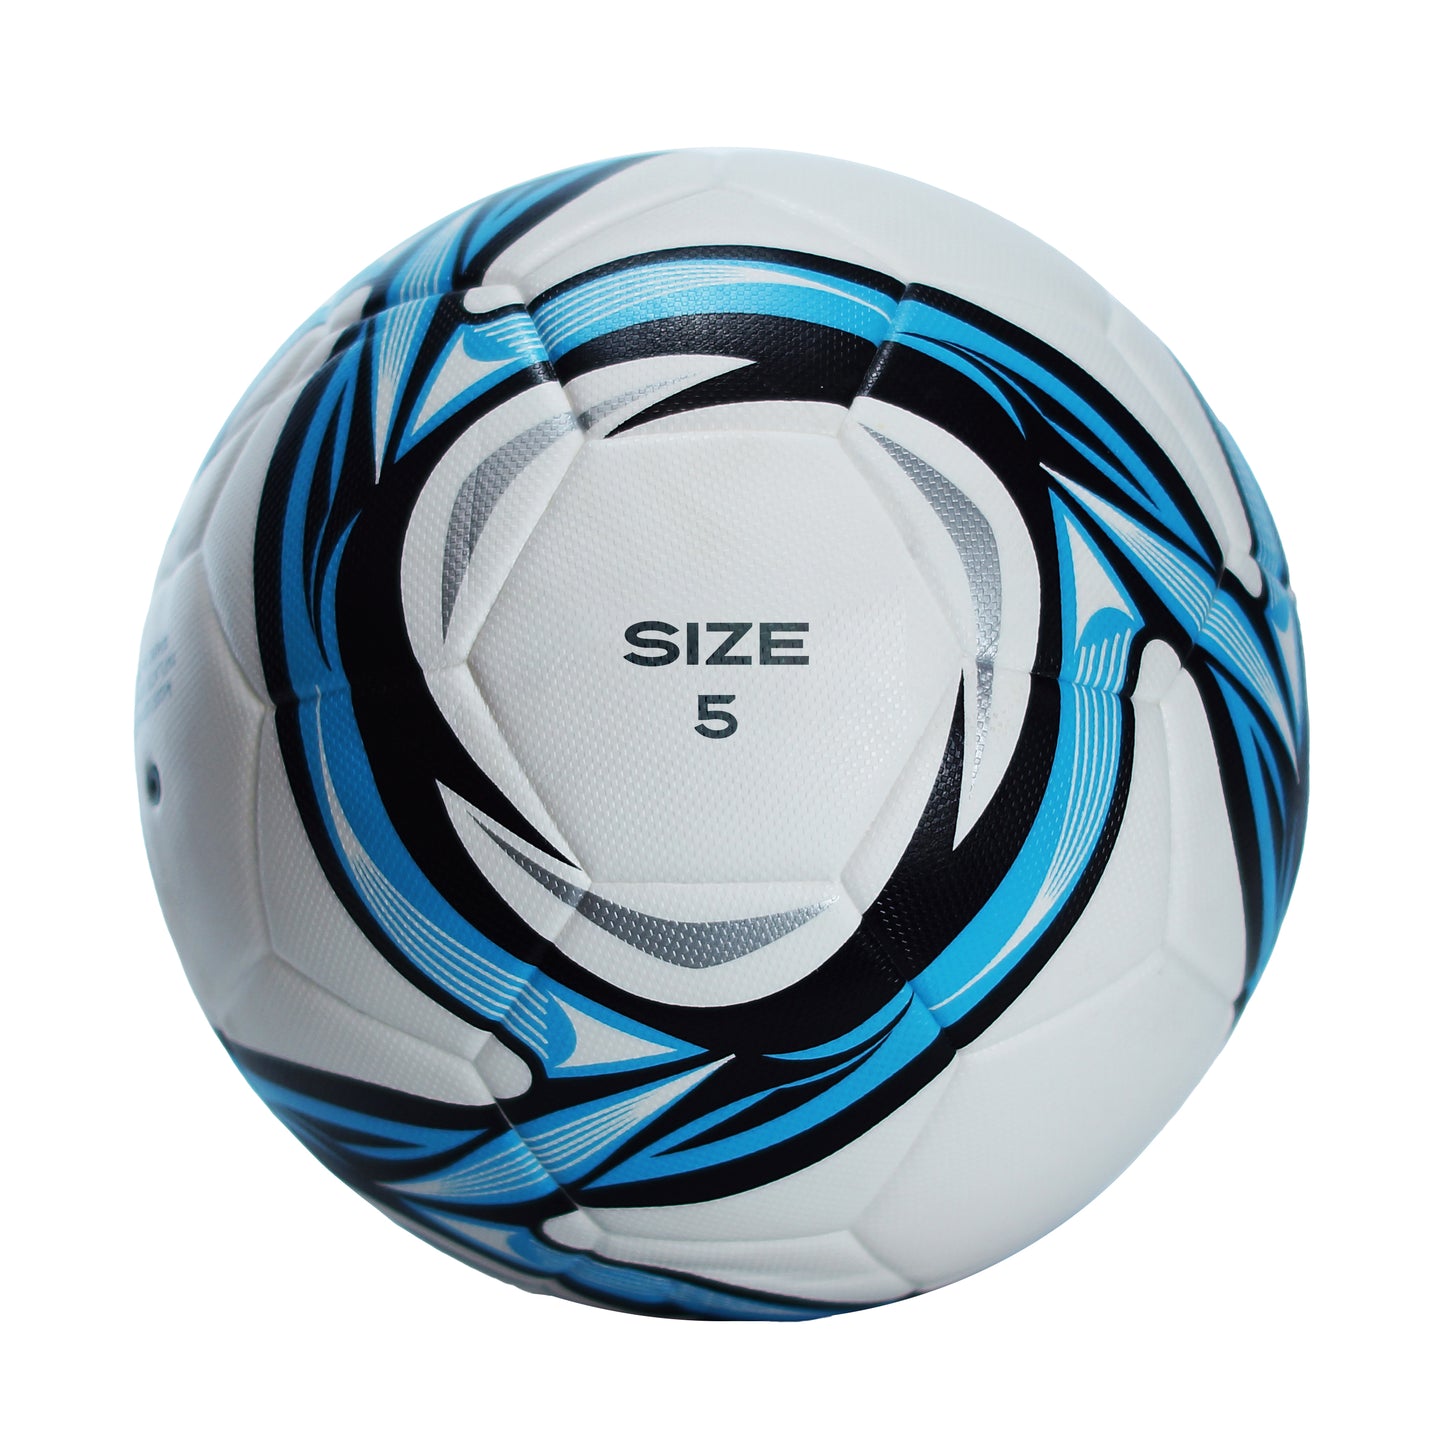 Performance Textured Match Ball with Thermal-Bonded Seams - Size 5